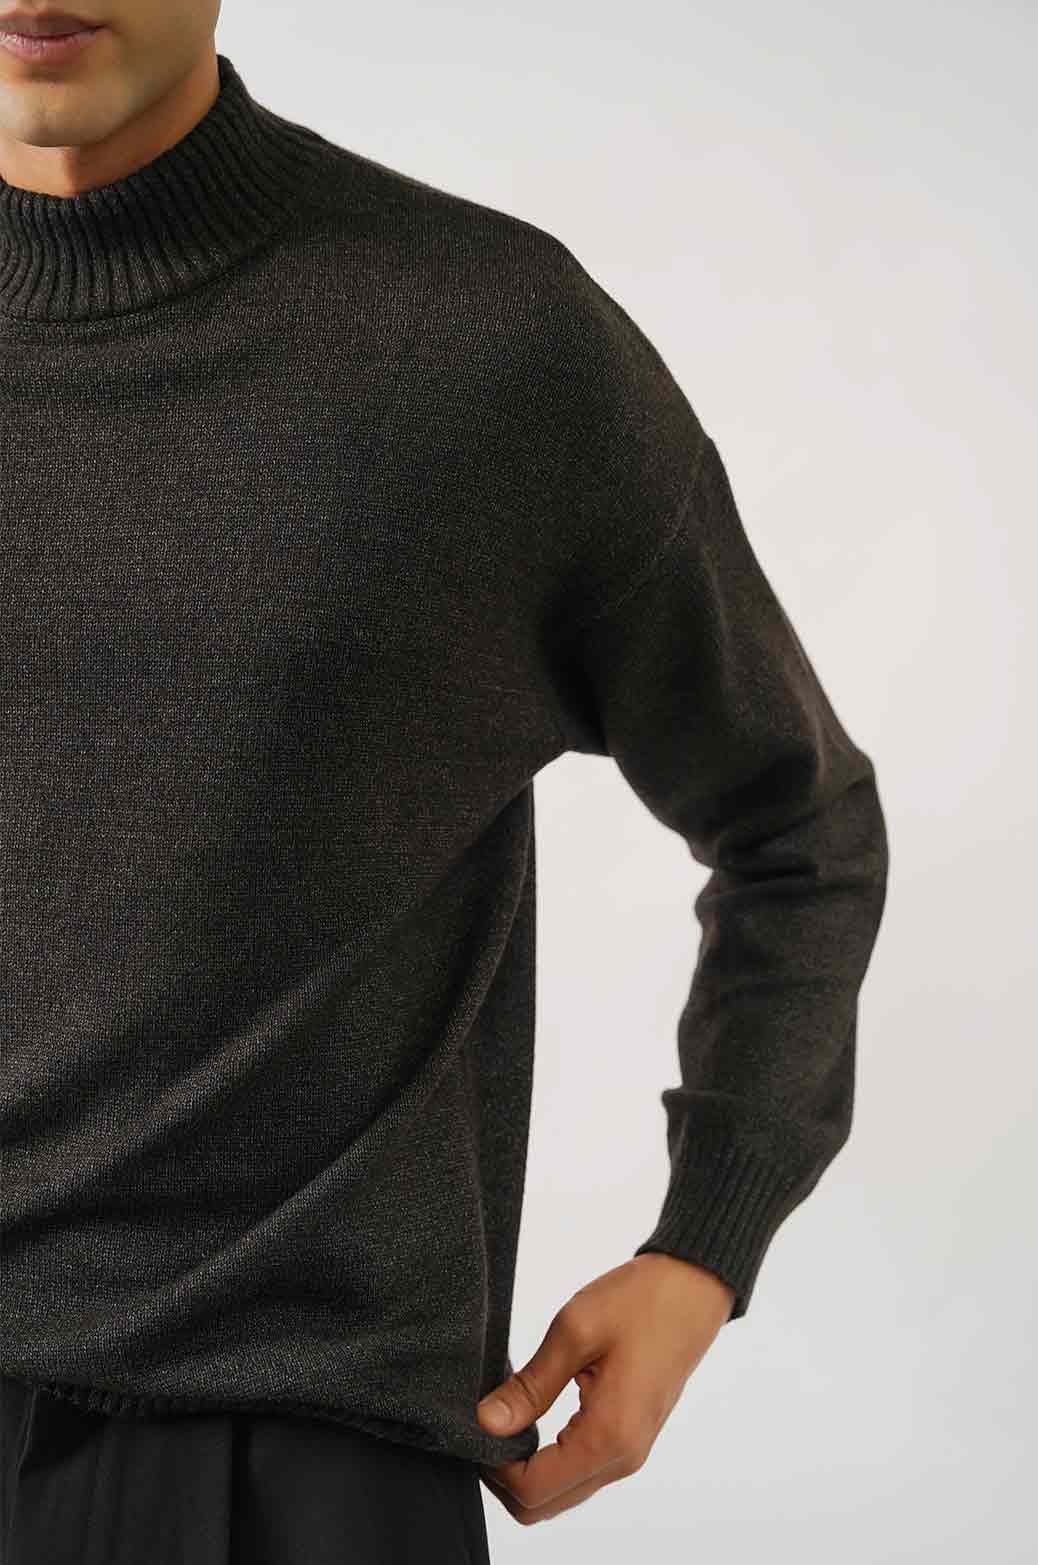 CHARCOAL RELAXED MOCK NECK SWEATER